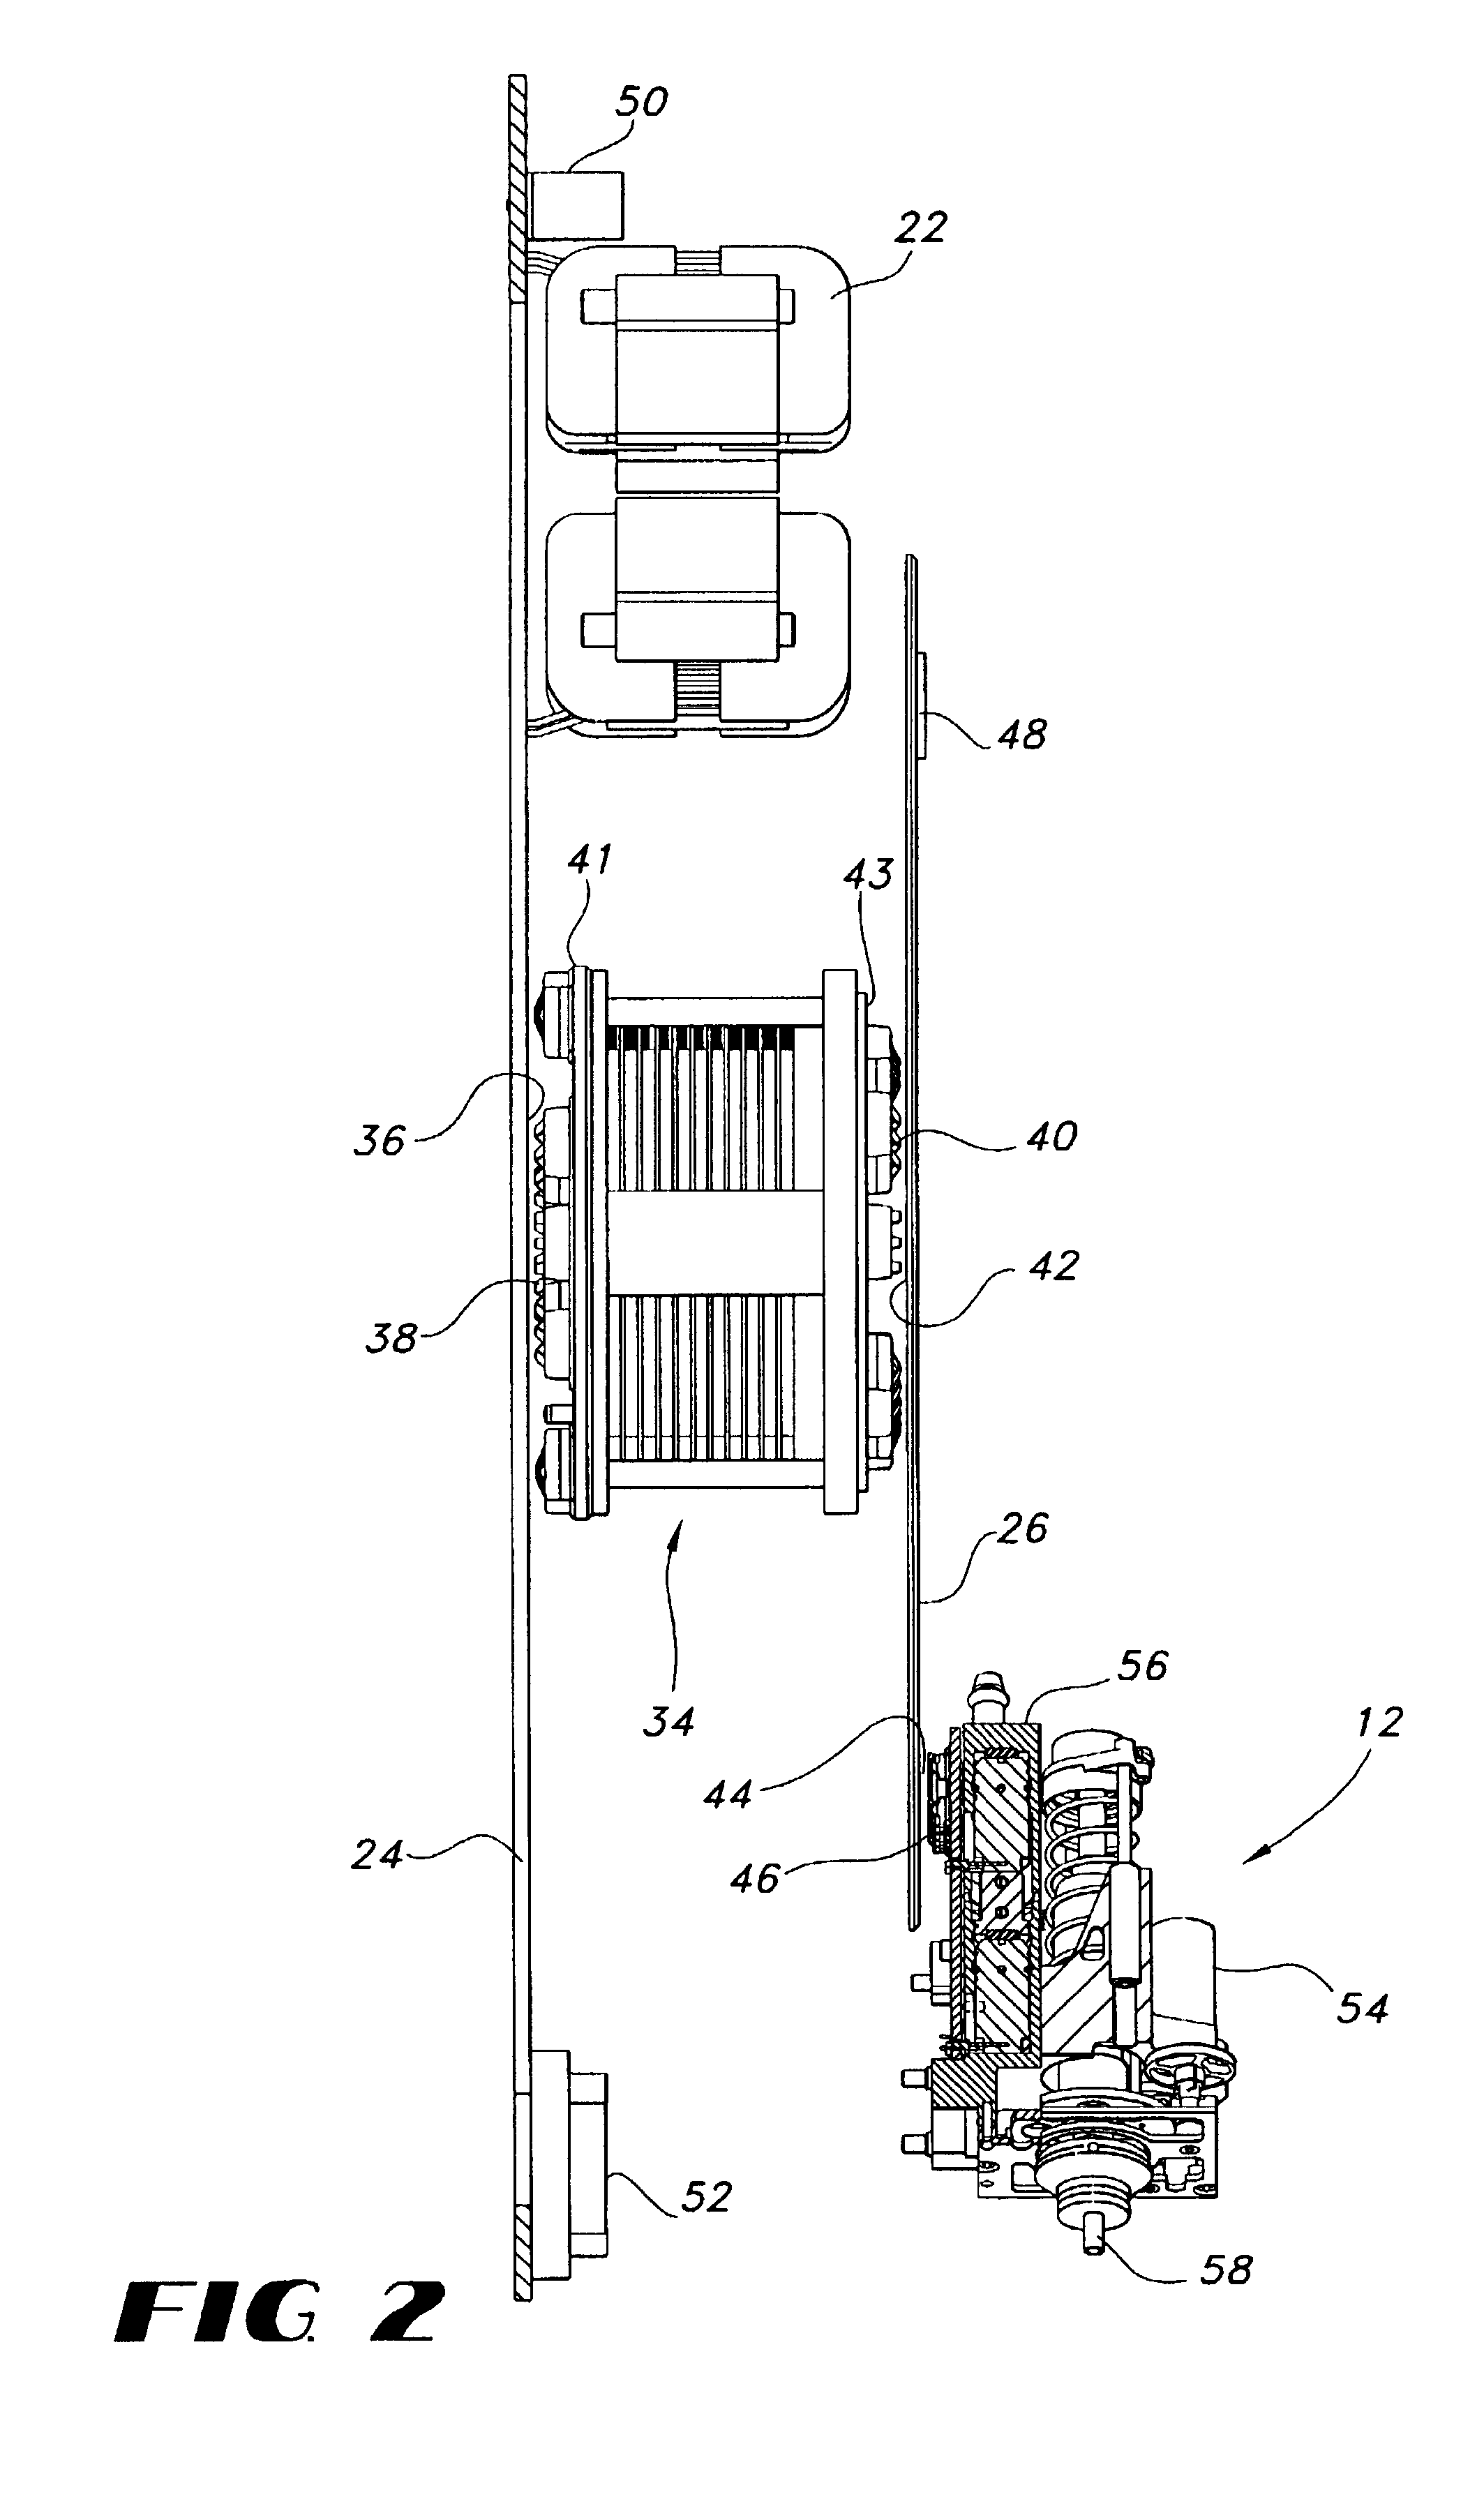 Cabeless interconnect system for pick and place machine